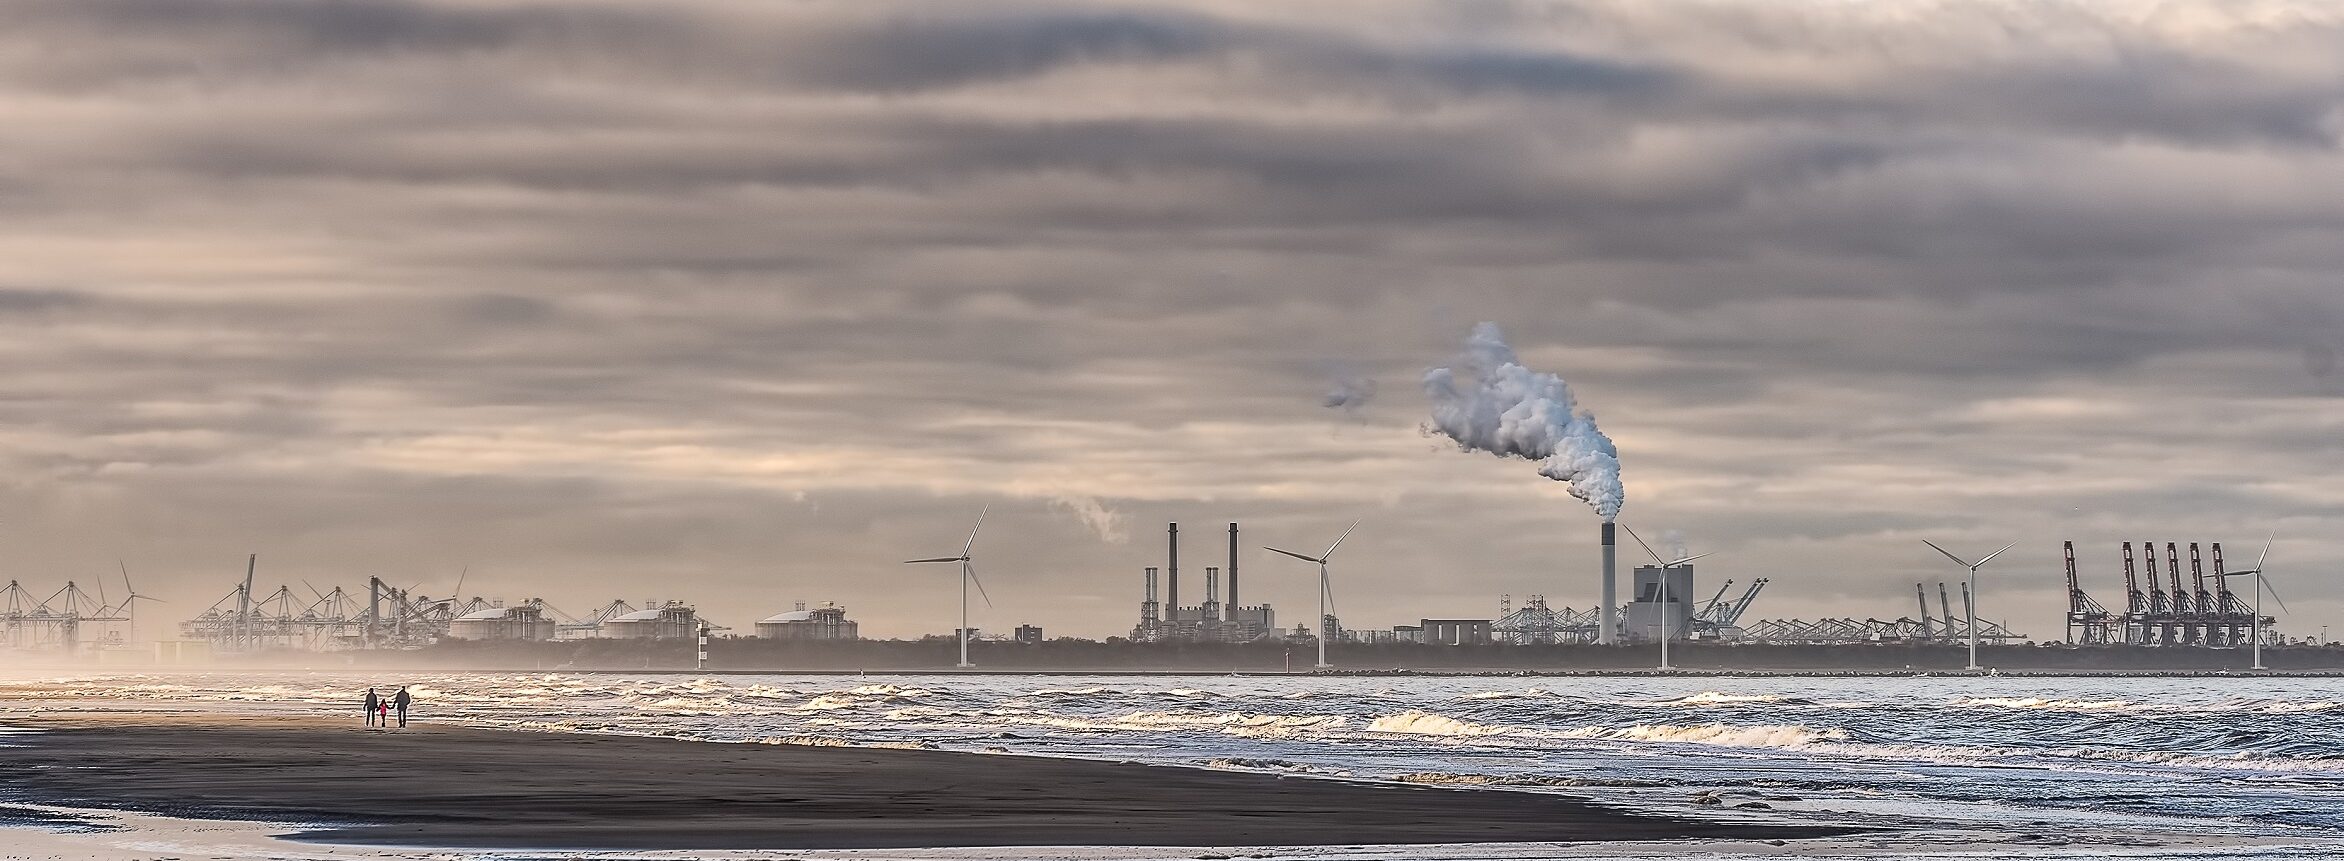 shot of a sea with windmills and factory in the distance under a cloudy sky